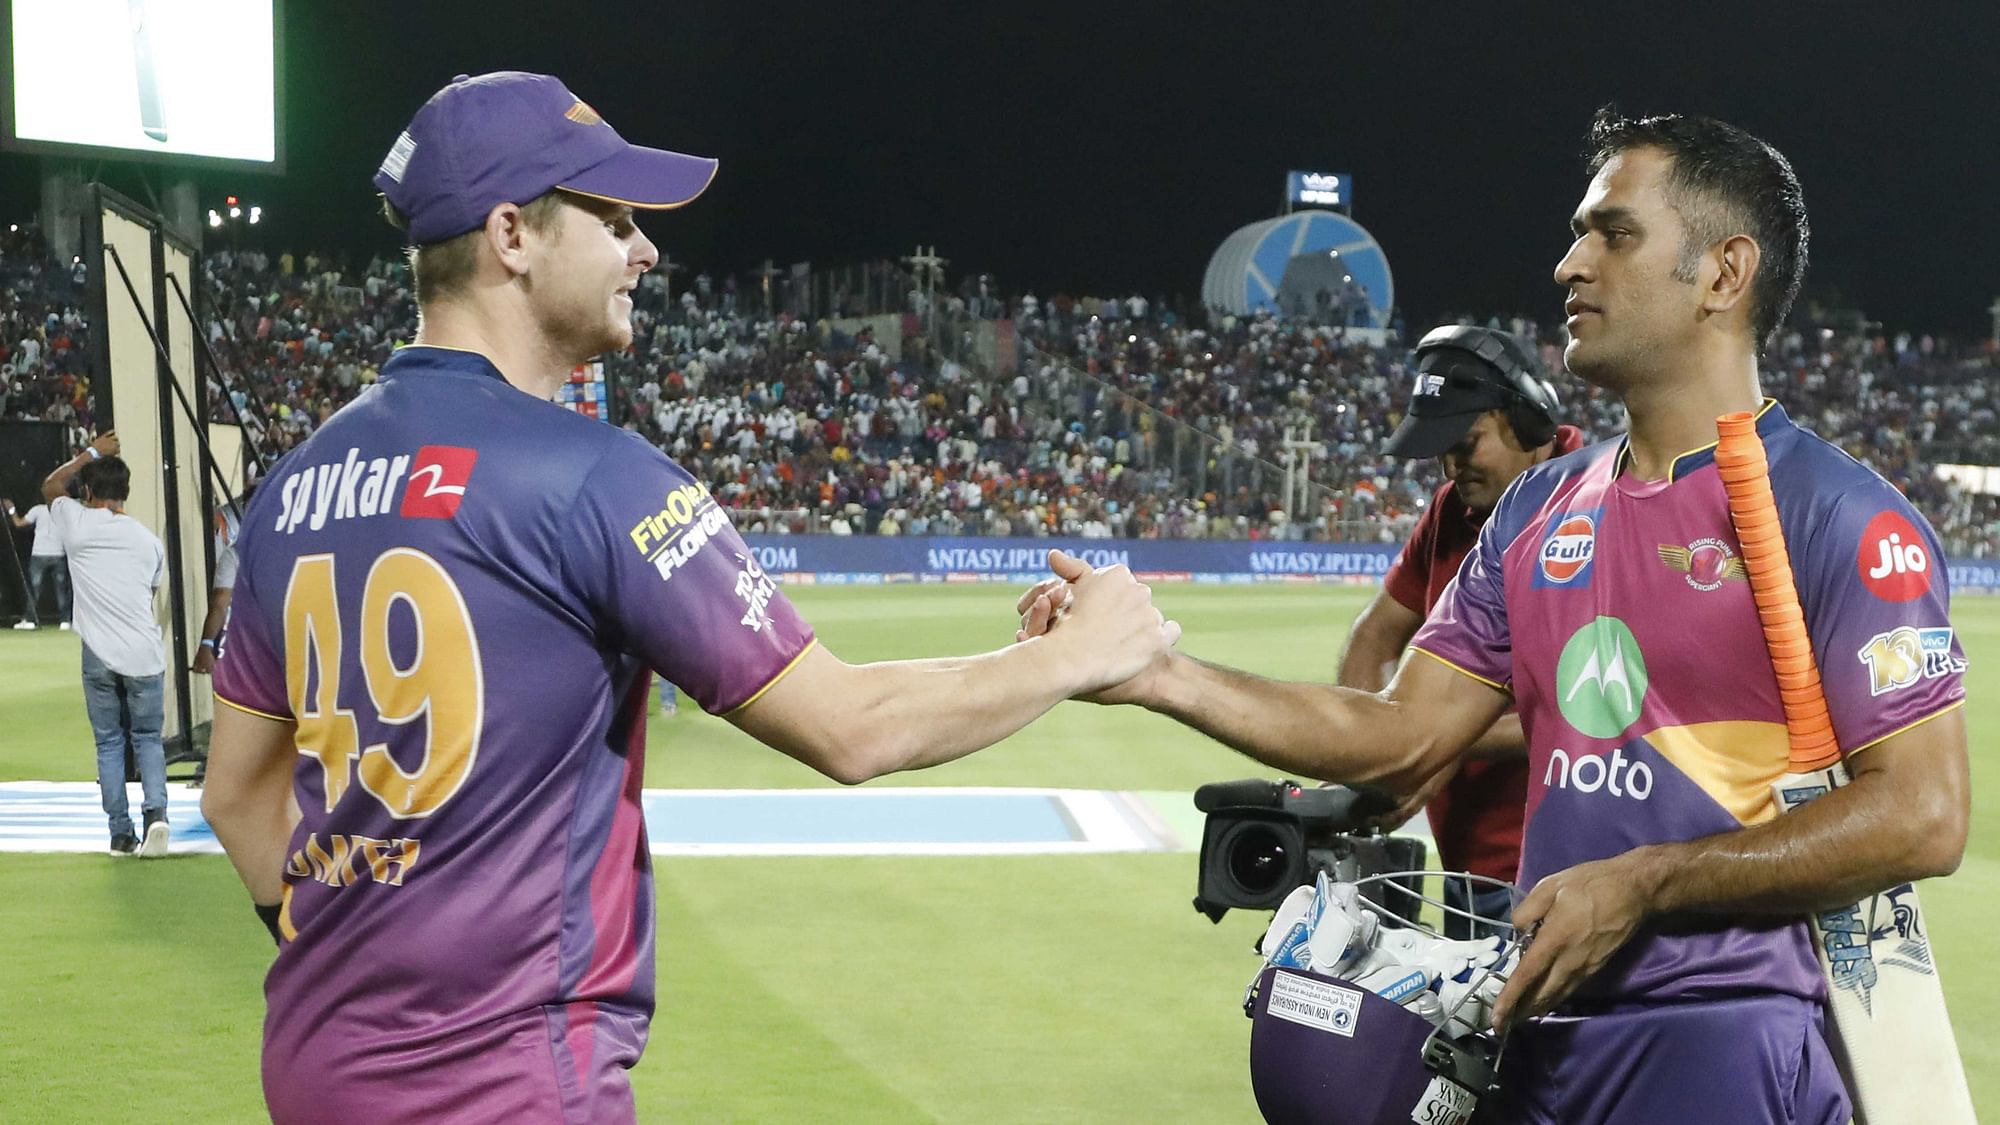 MS Dhoni was forced to hand over the Pune captaincy to Steve Smith at the start of the season. (Photo: BCCI)